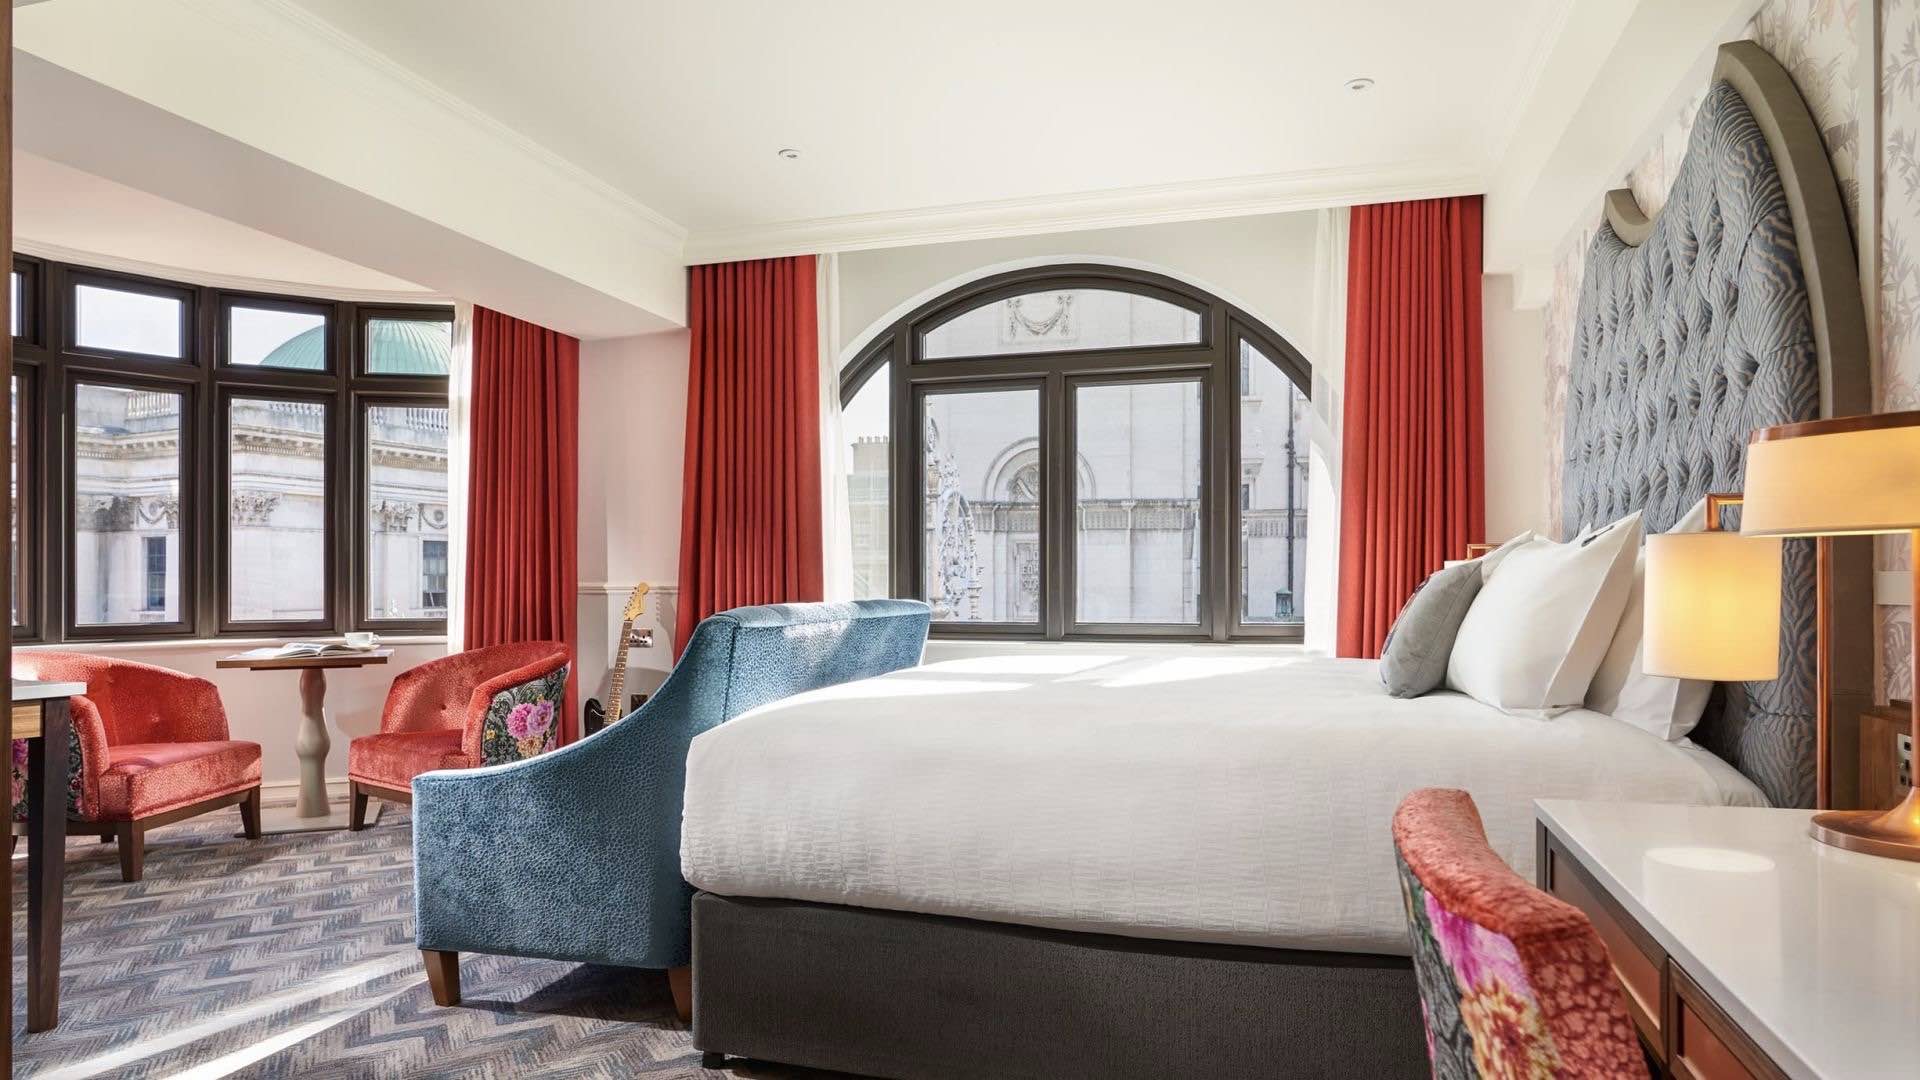 Hard Rock Hotel is one of the best design hotels in Dublin showing room with guitar and city views 